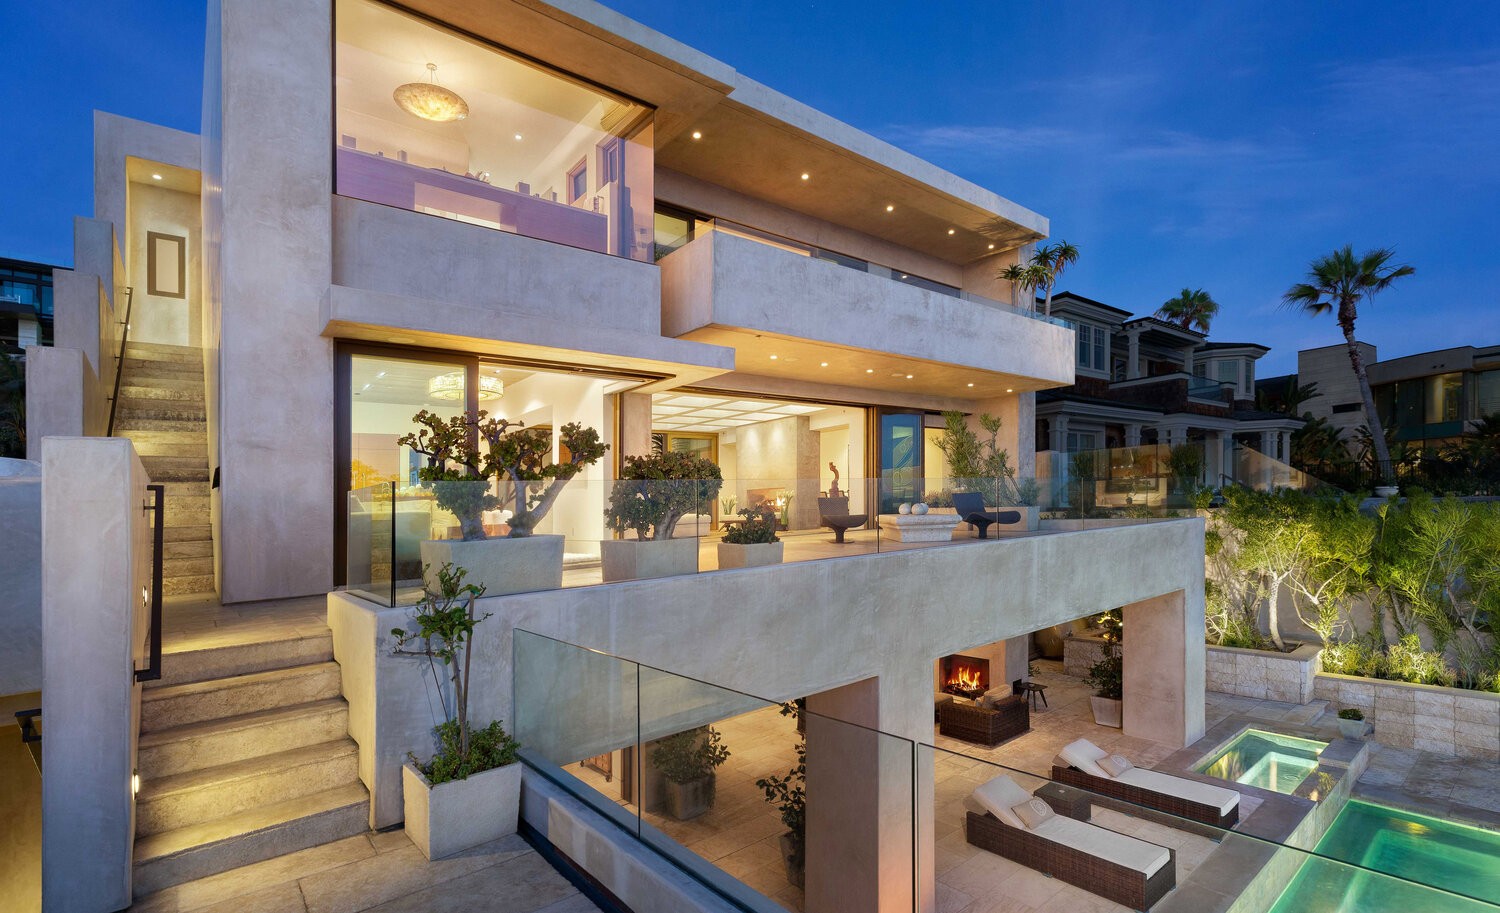 This $26M “Healthy House” Has Tesla Batteries and Bunker, Is Apocalypse ...